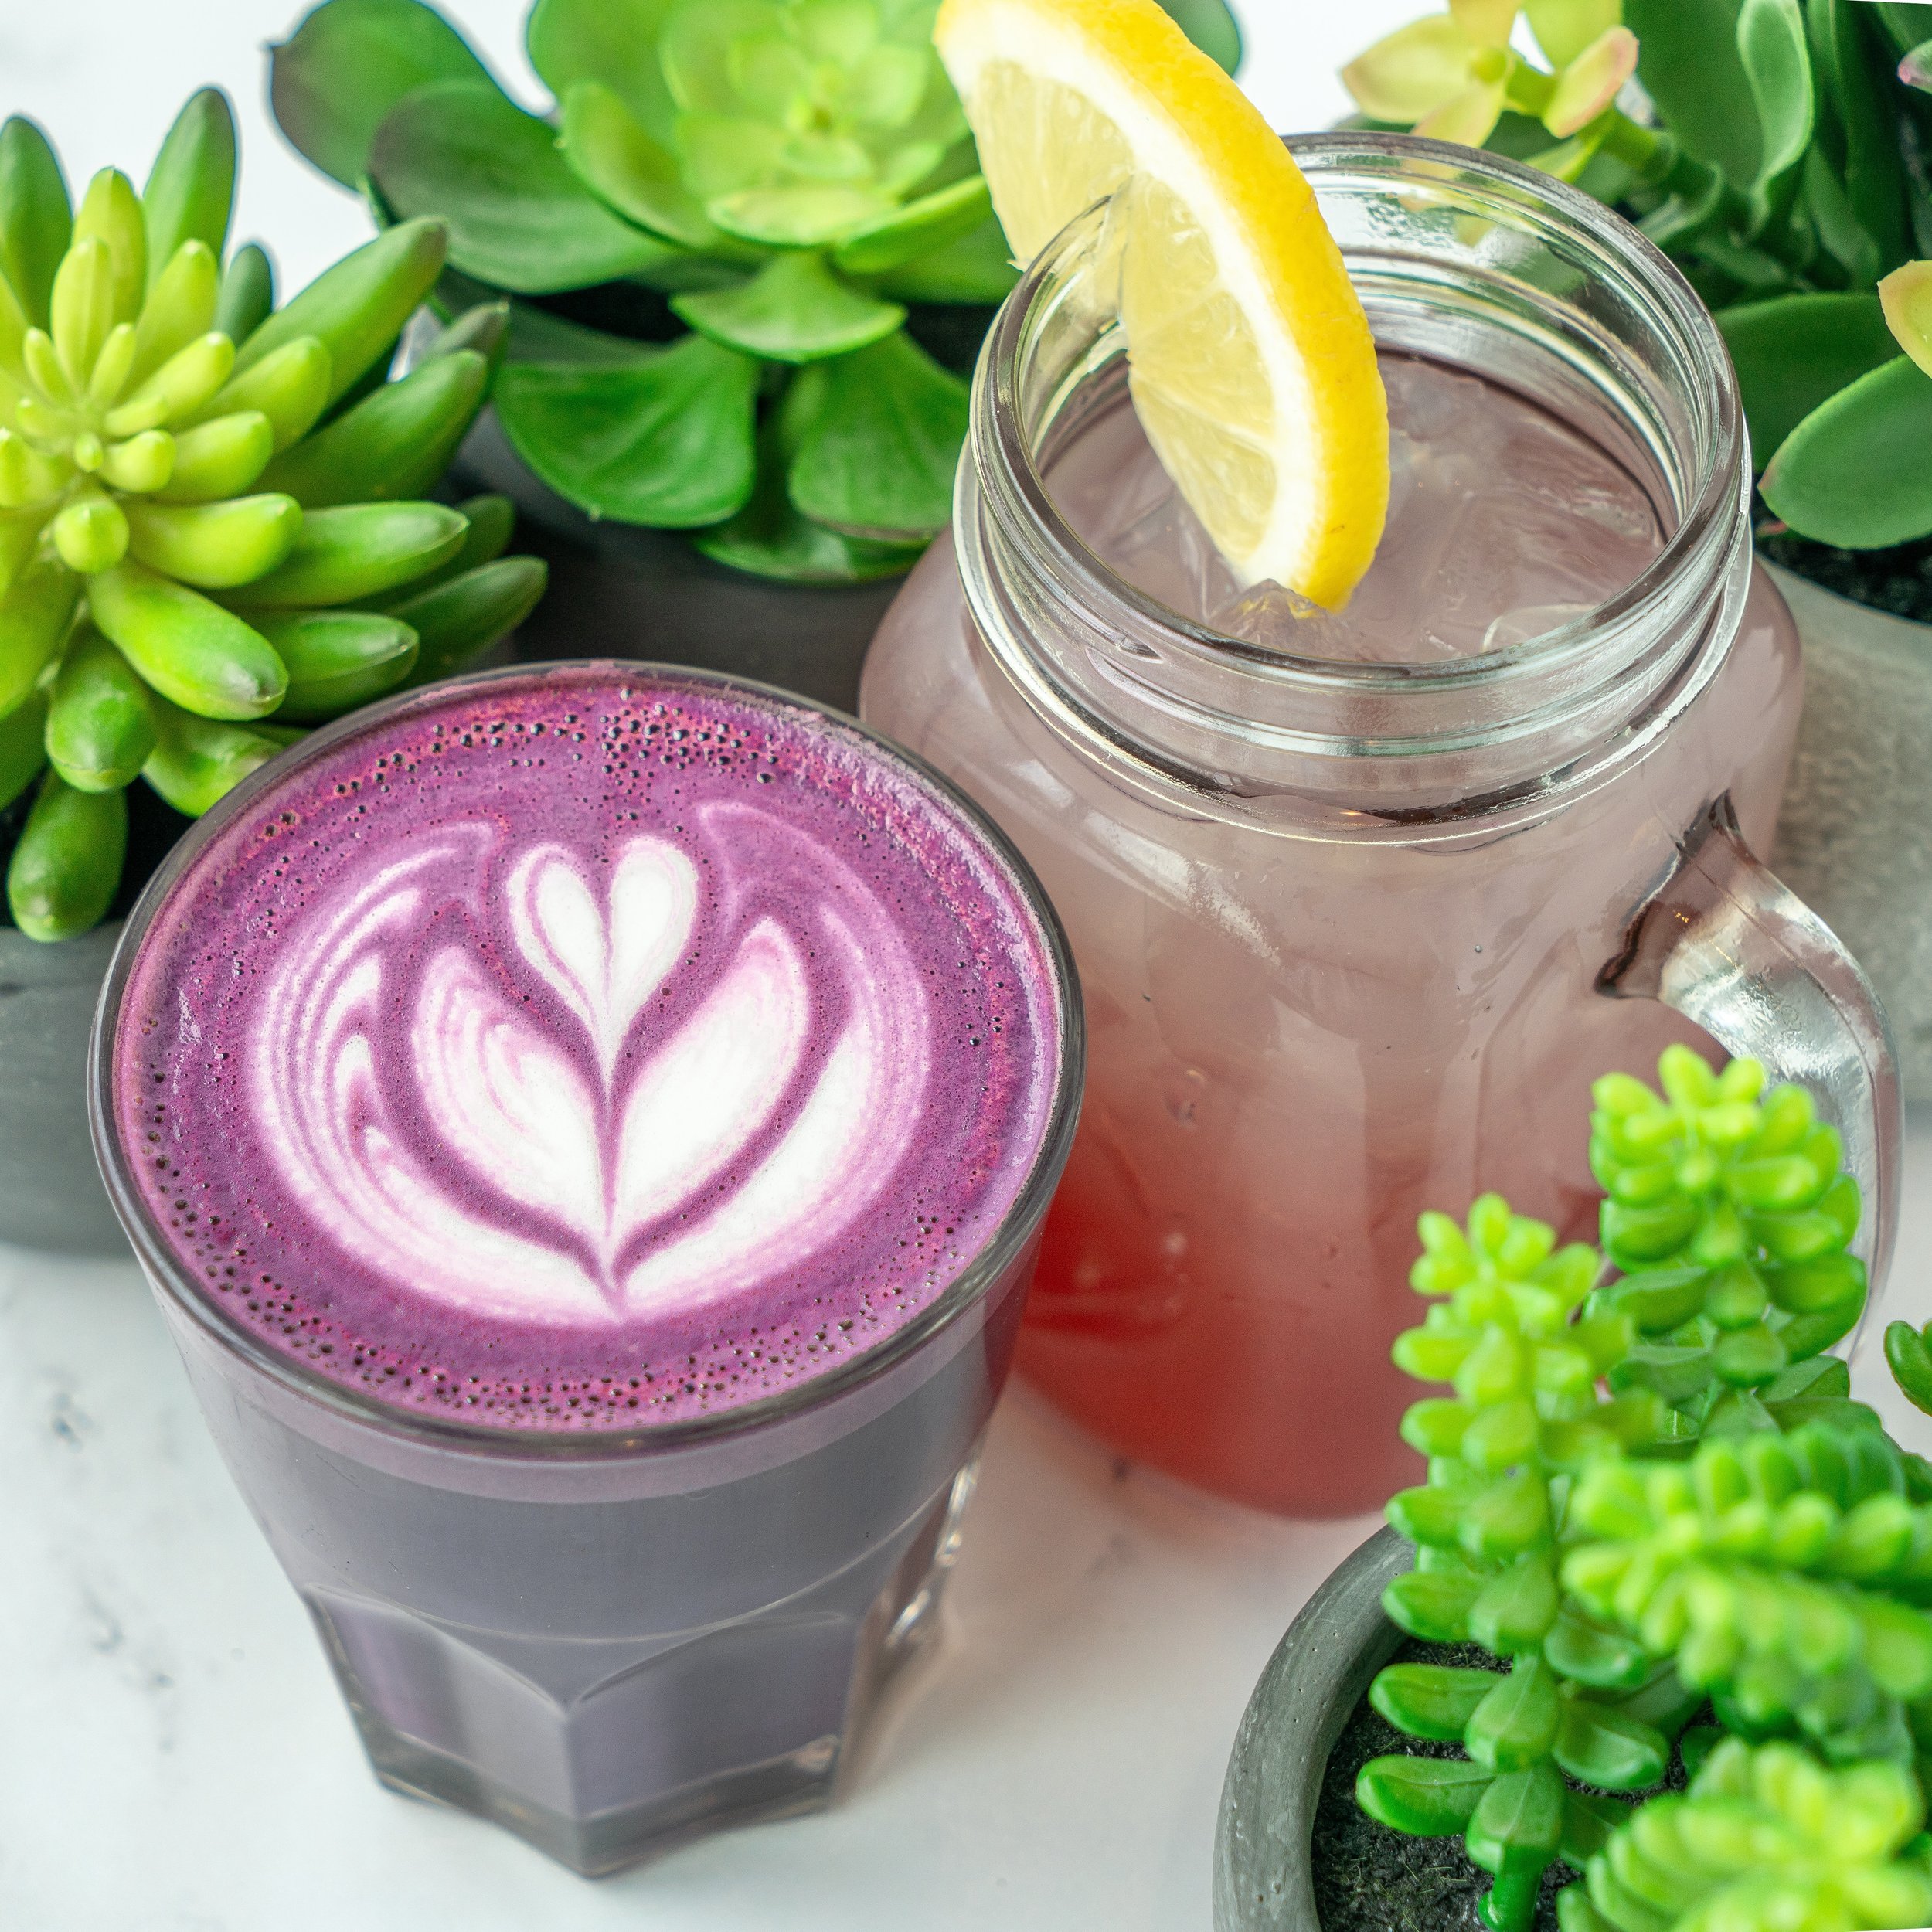 🌍 SIP HAPPY THIS EARTH DAY 🌍

Today we celebrate Earth with flavors as vibrant as nature itself! Meet our Ube Latte and Berry Blossom Lemonade&mdash;true tributes to the season&rsquo;s colors and tastes. 🌸☕ Perfect for a refreshing pause on this p